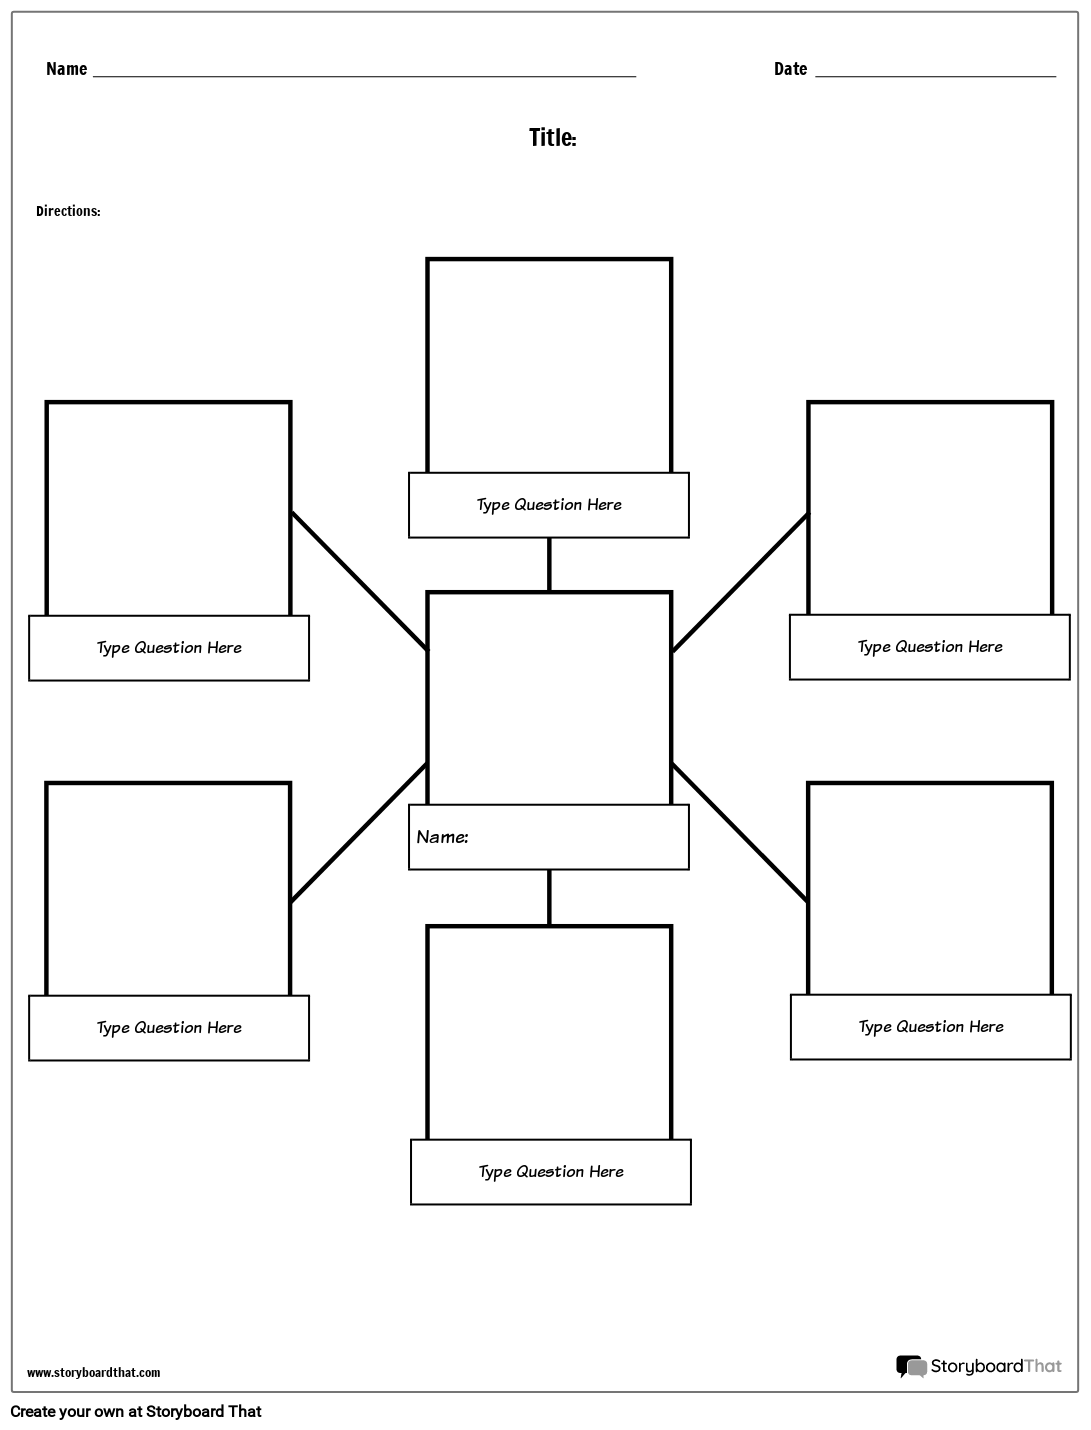 all-about-me-spider-chart-storyboard-por-worksheet-templates